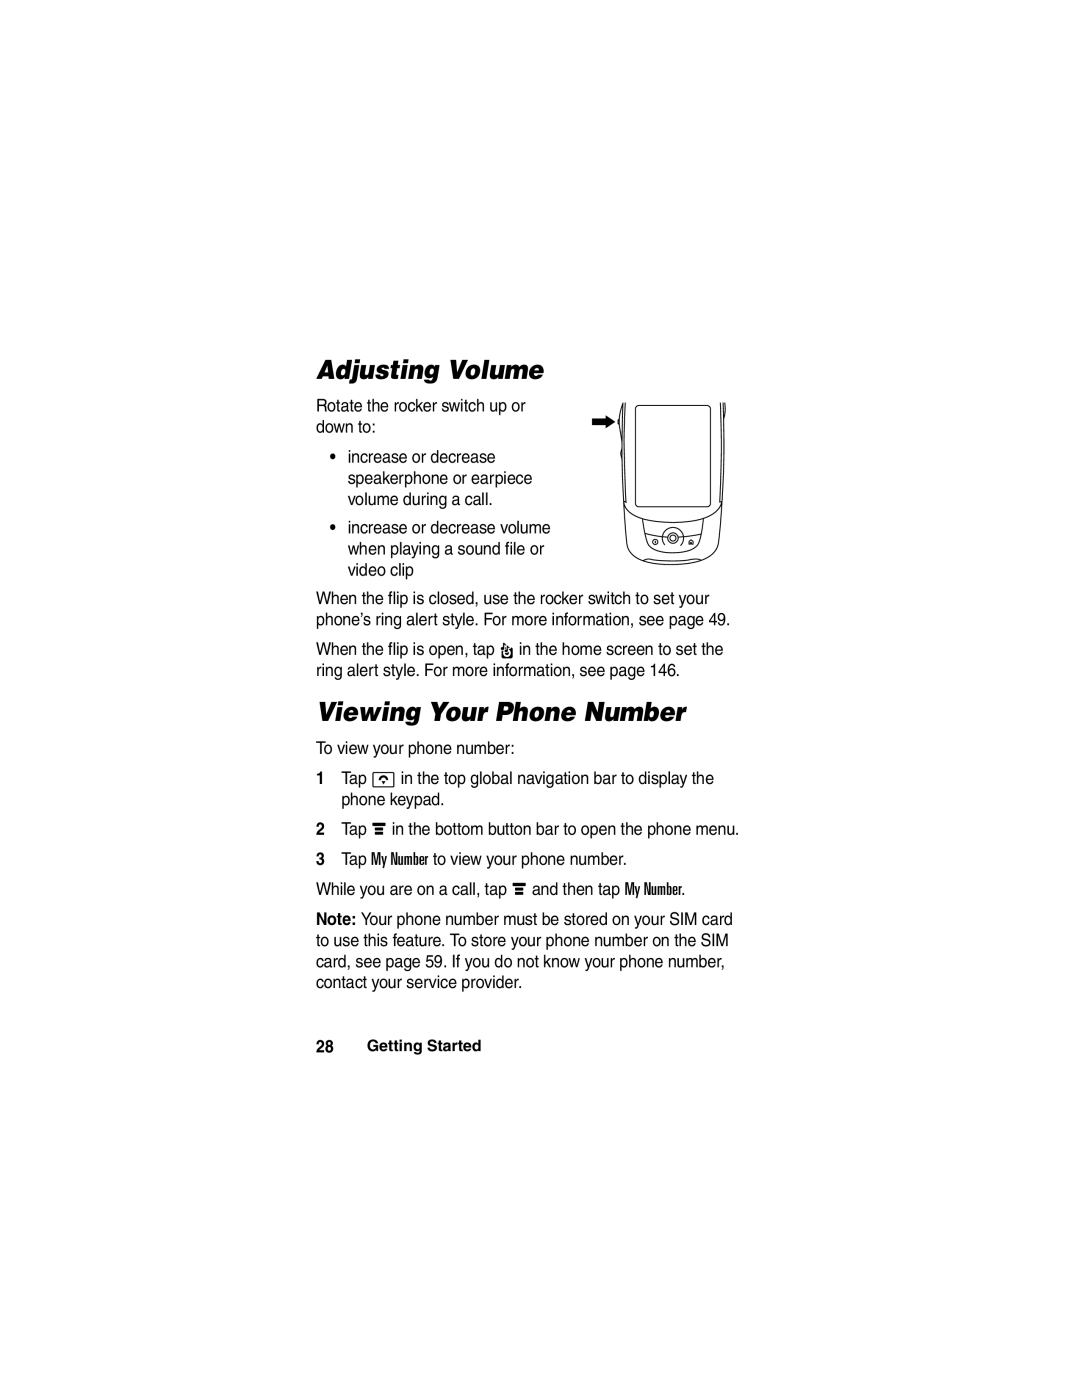 Motorola A780 manual Adjusting Volume, Viewing Your Phone Number, Getting Started 